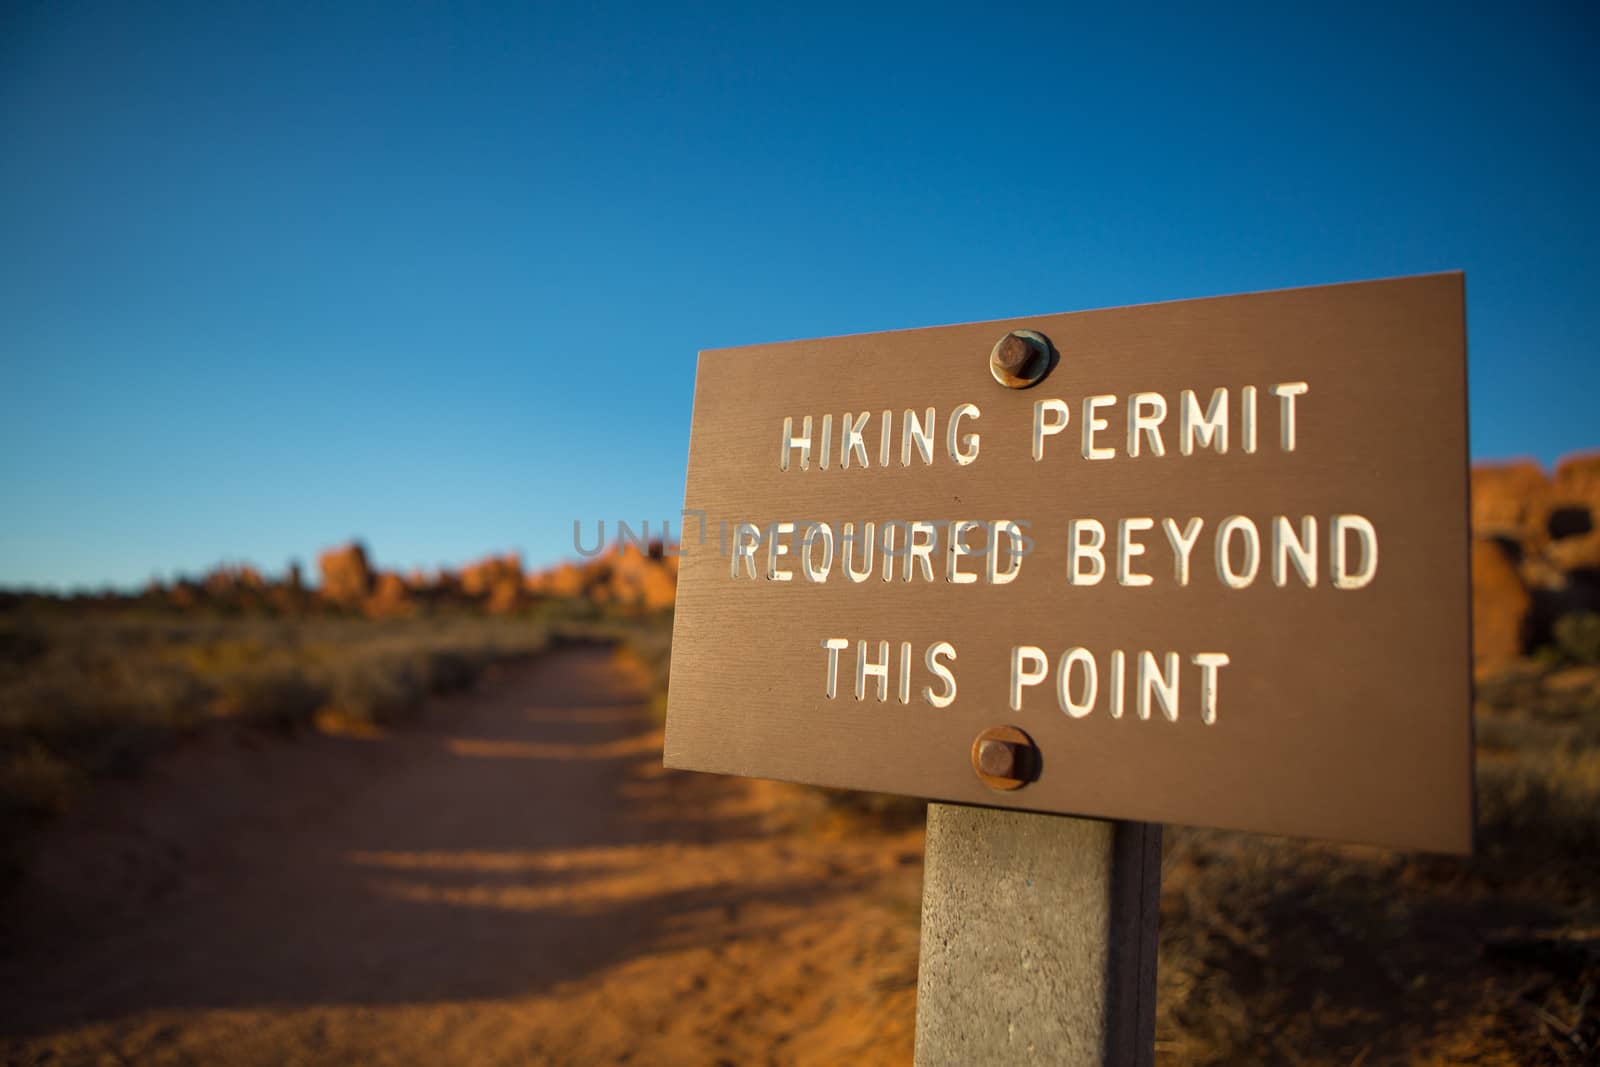 Trail Sign in Arches National Park against a blue sky late afternoon, Utah